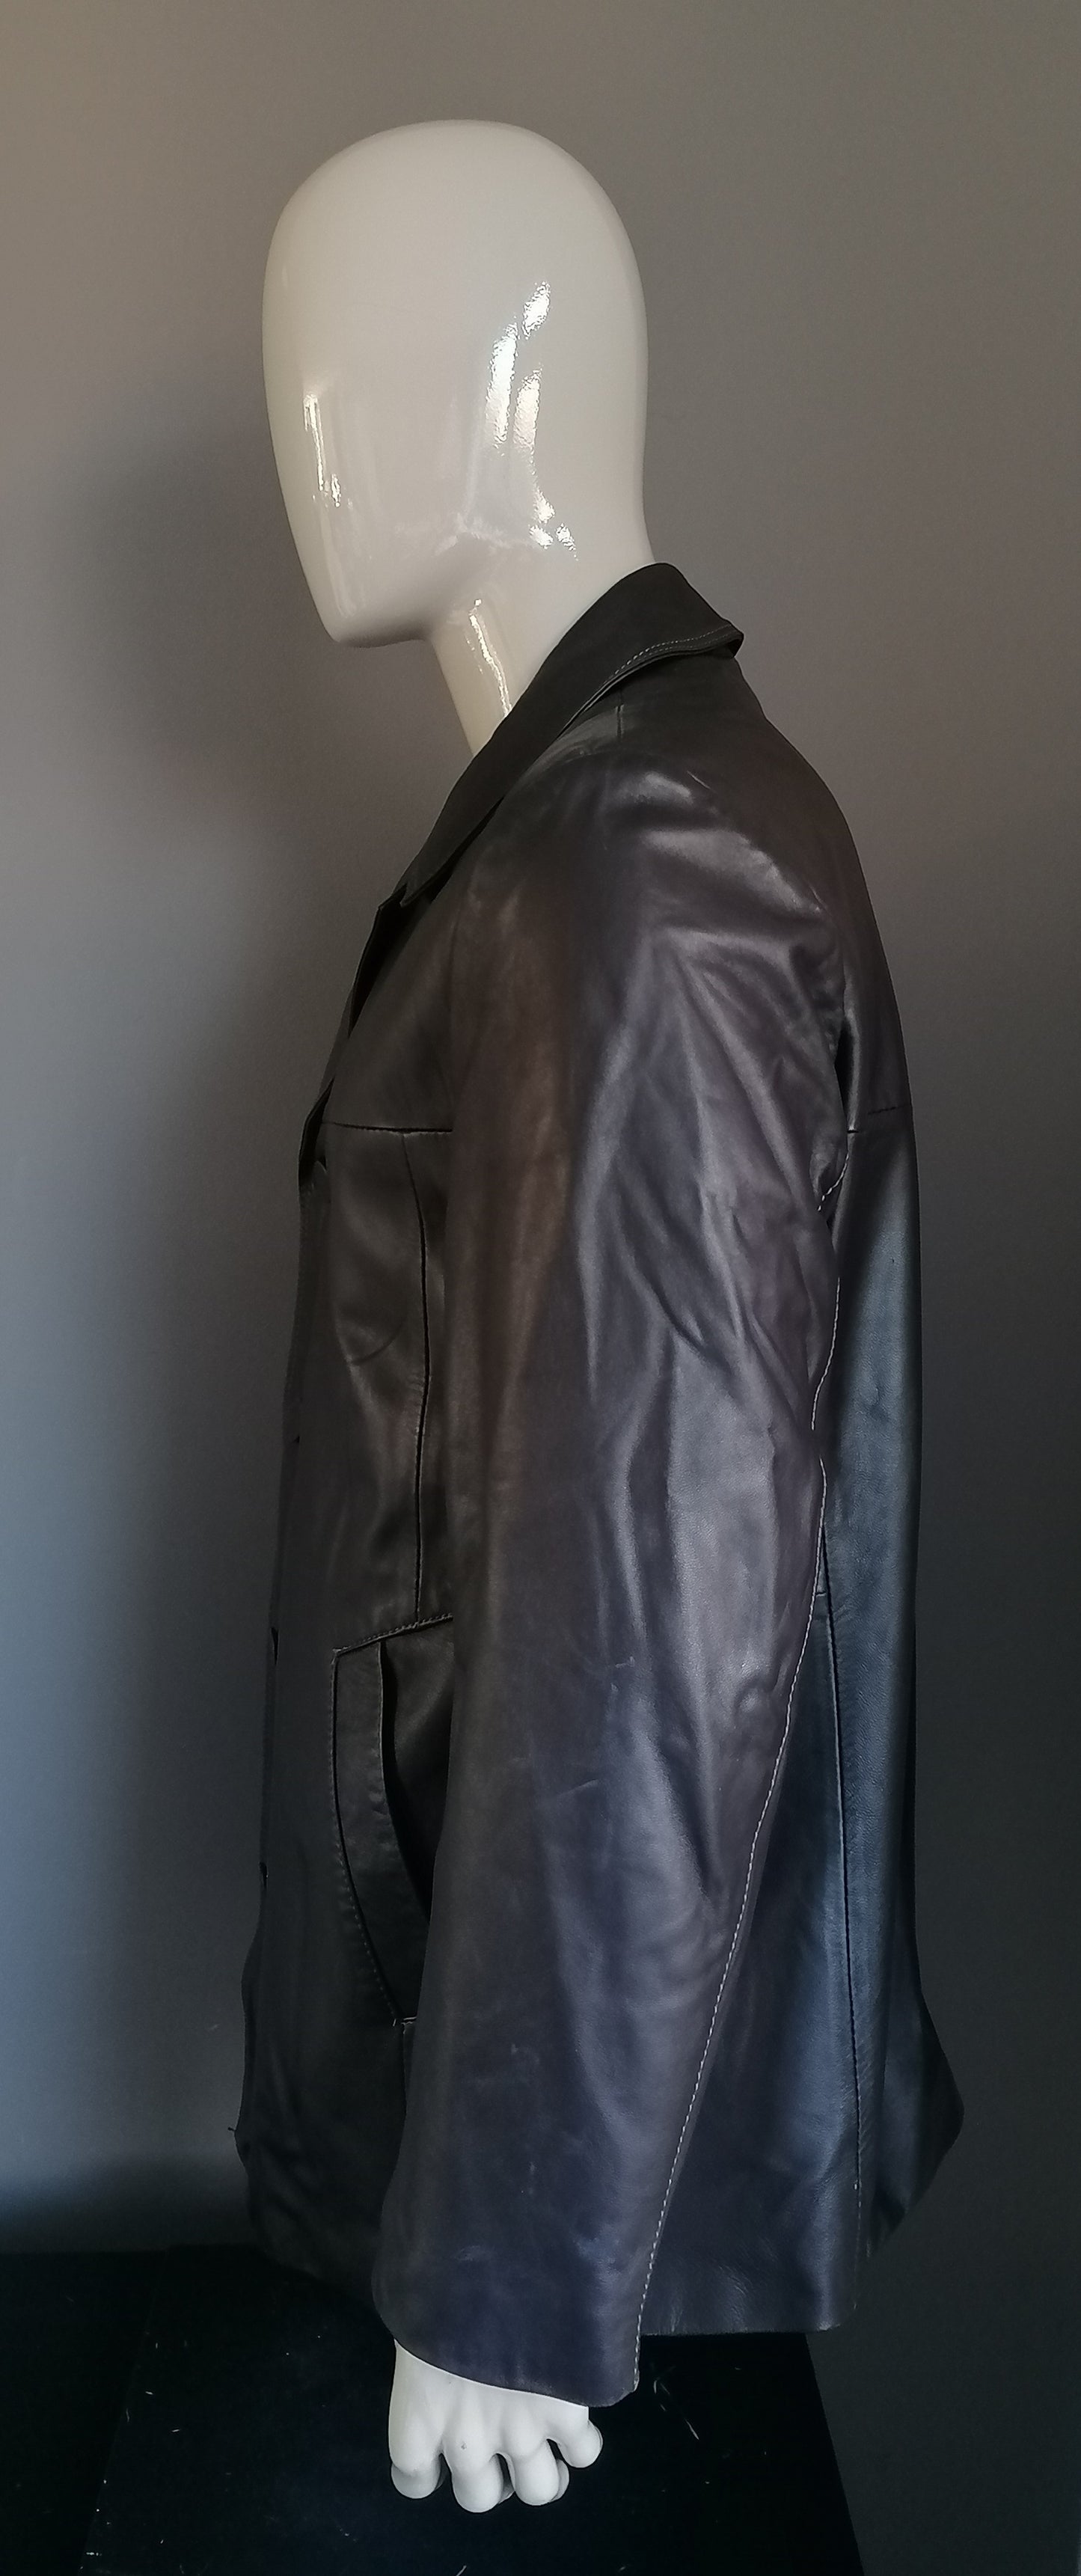 B choice: L&B Ledermode leather jacket. Dark brown colored. Size 54 / L. spots on sleeve.